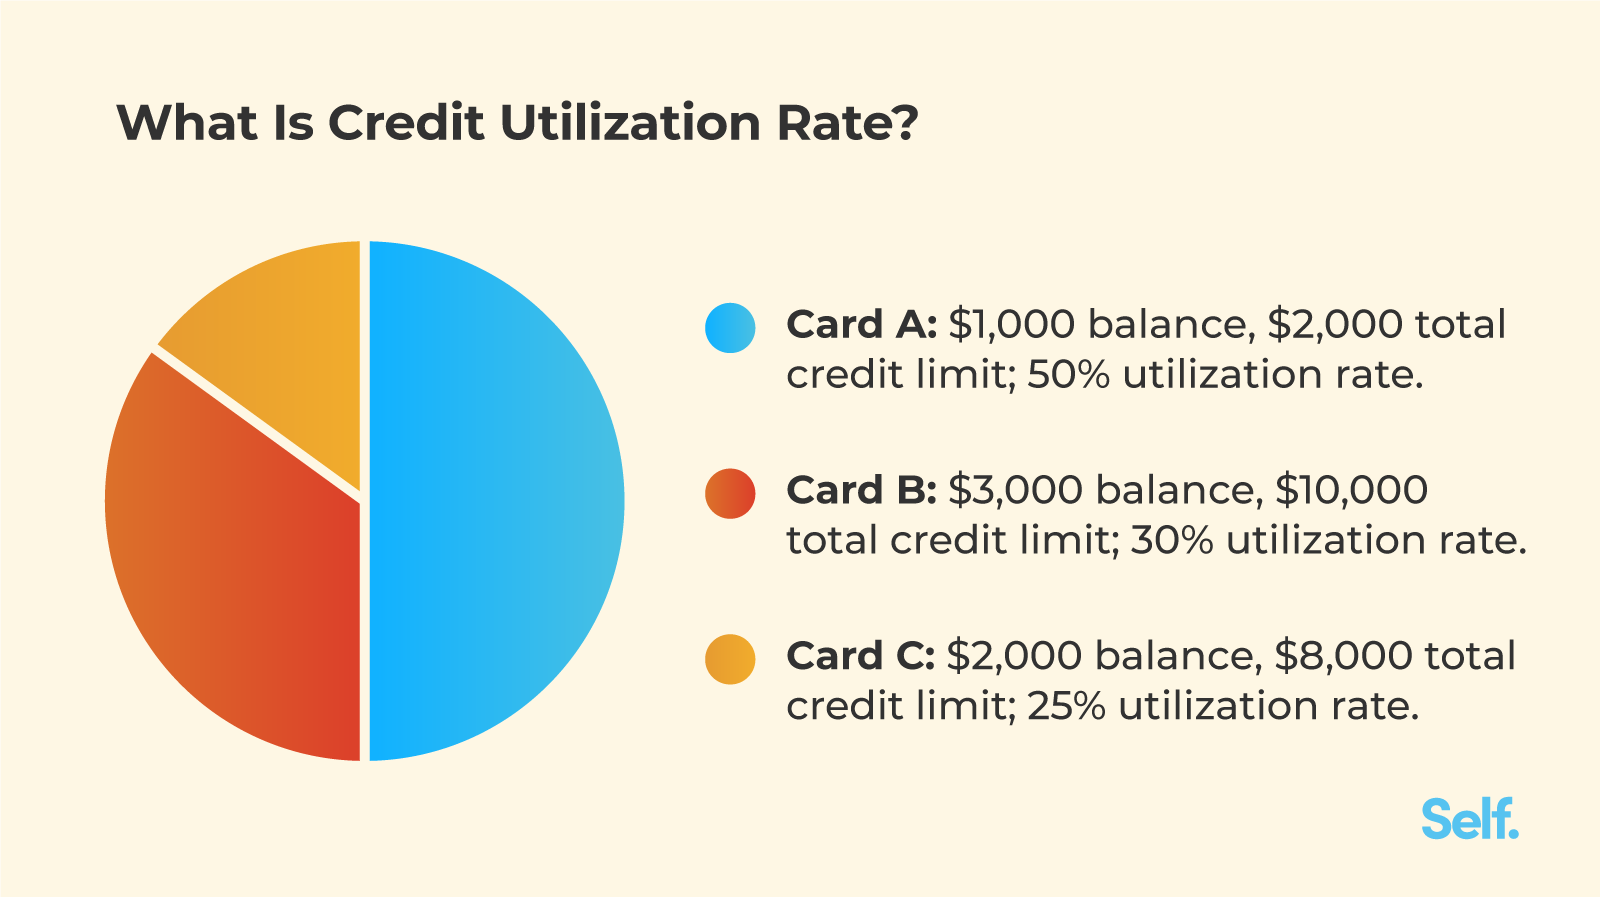 What is credit utilization rate